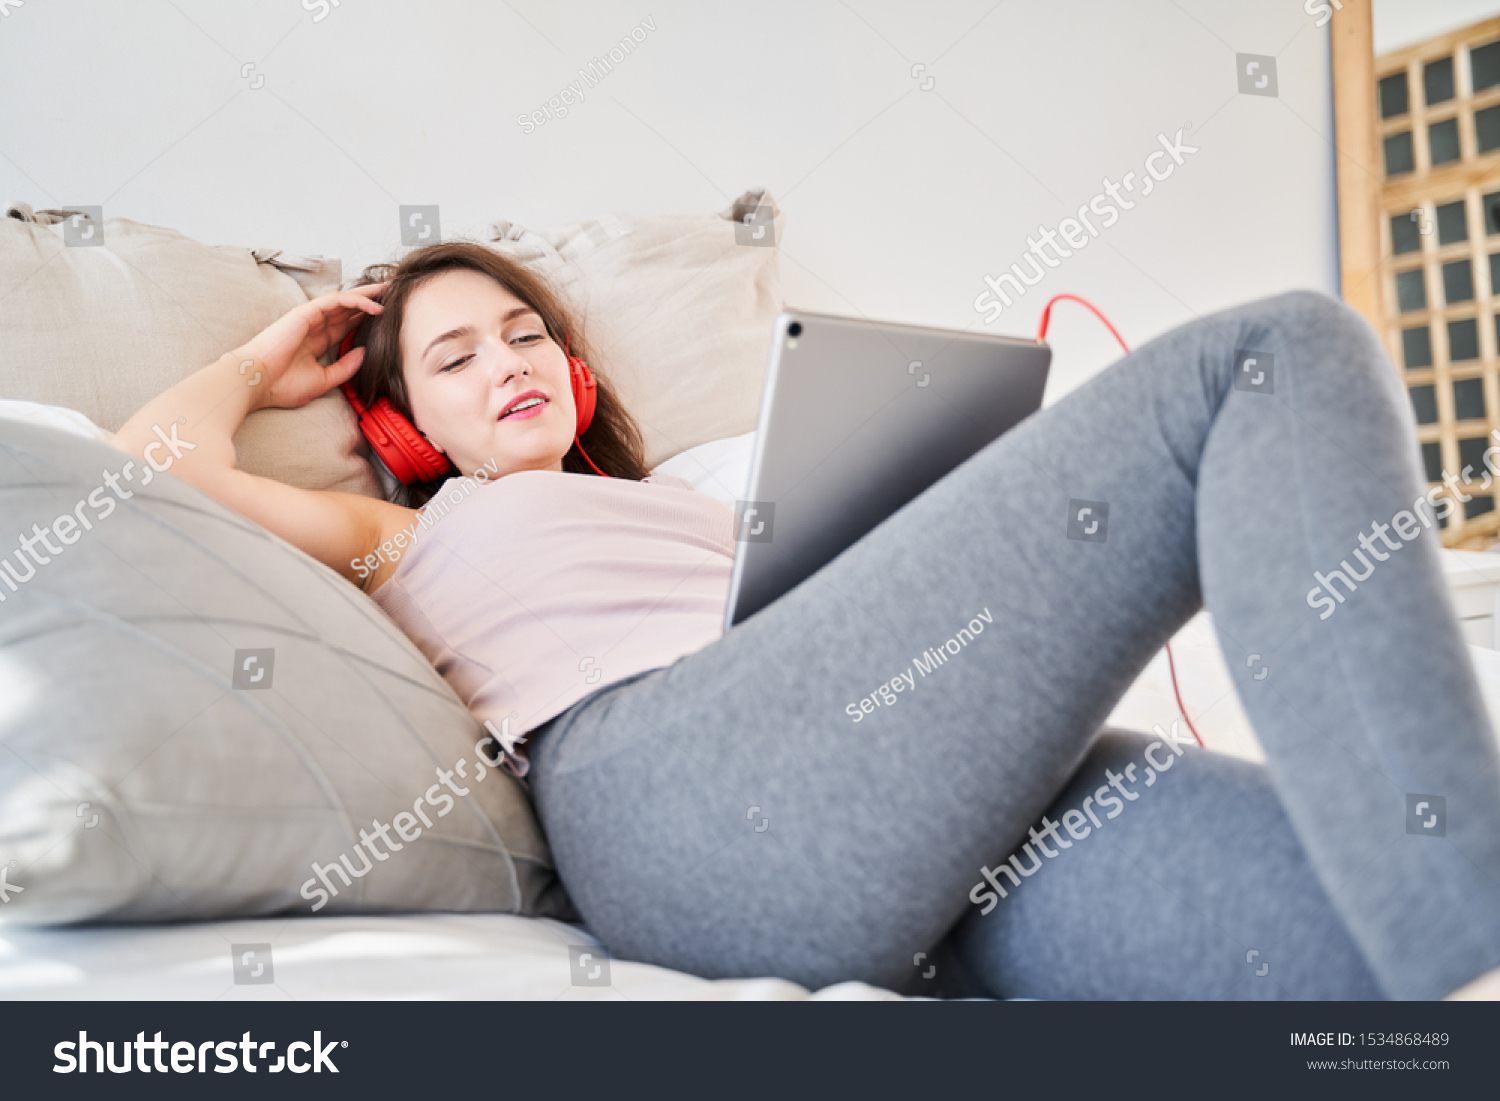 Image of young brunette woman with tablet in her hands listening music while lying on bed. #1534868489